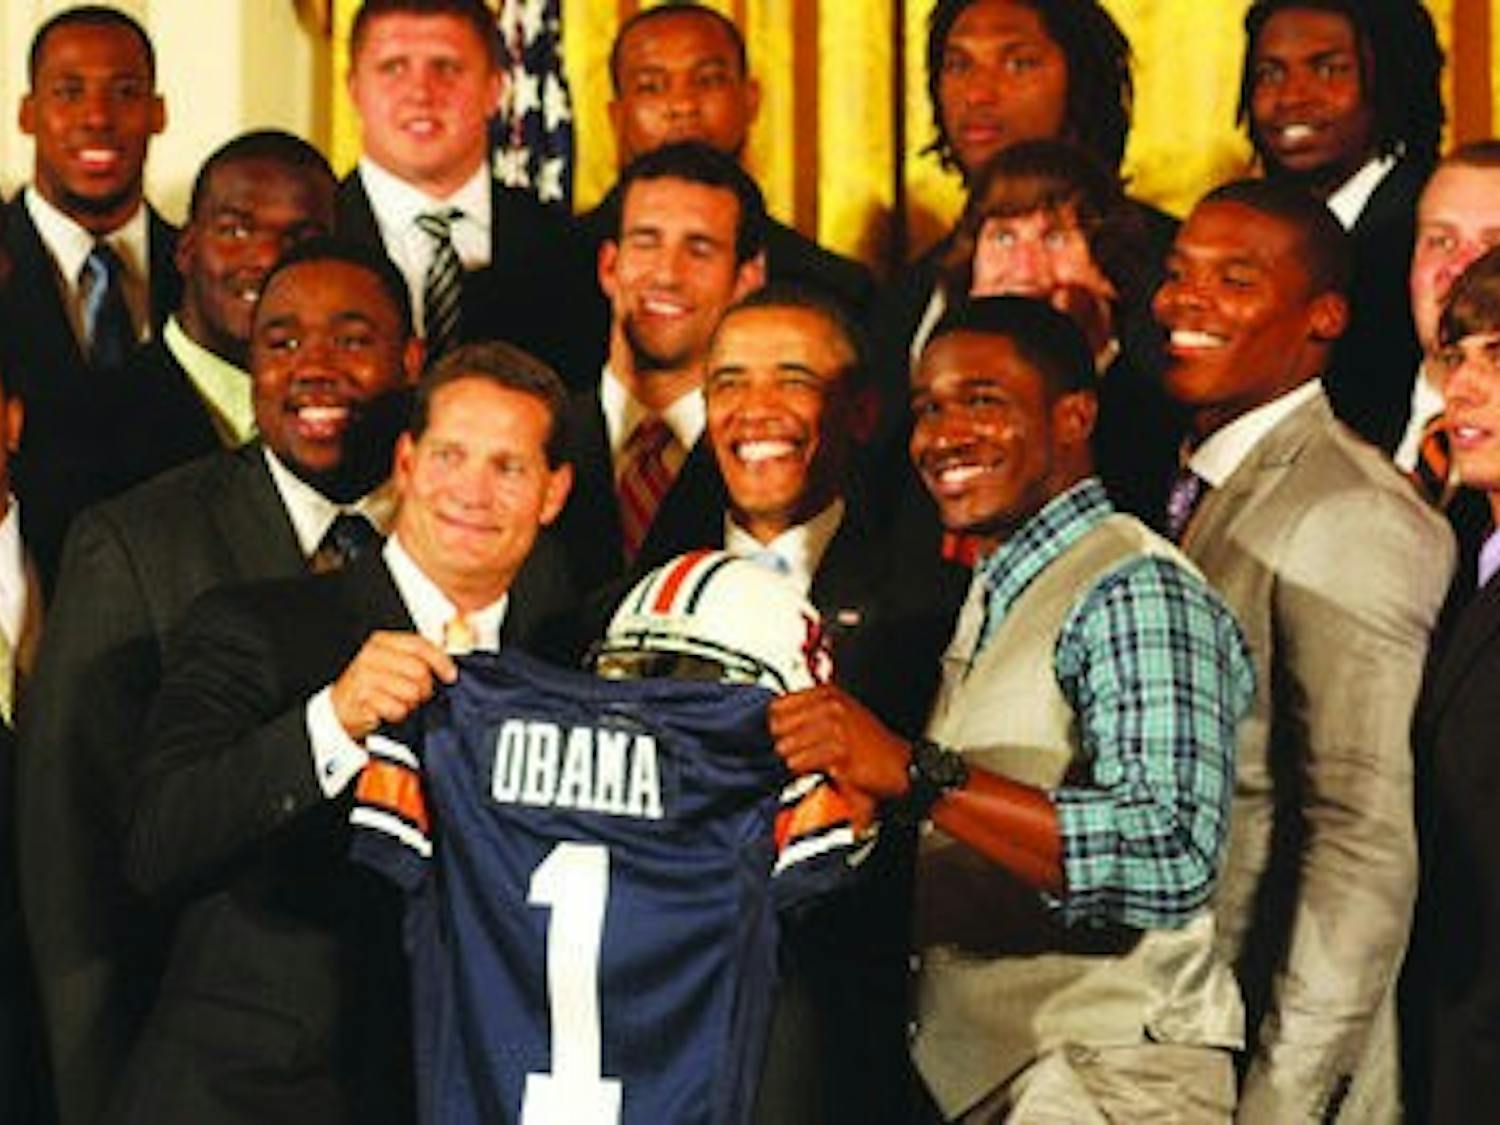 The Auburn Tigers national championship team met with President Barack Obama at the White House June 8. (Blakely Sisk / PHOTO STAFF)